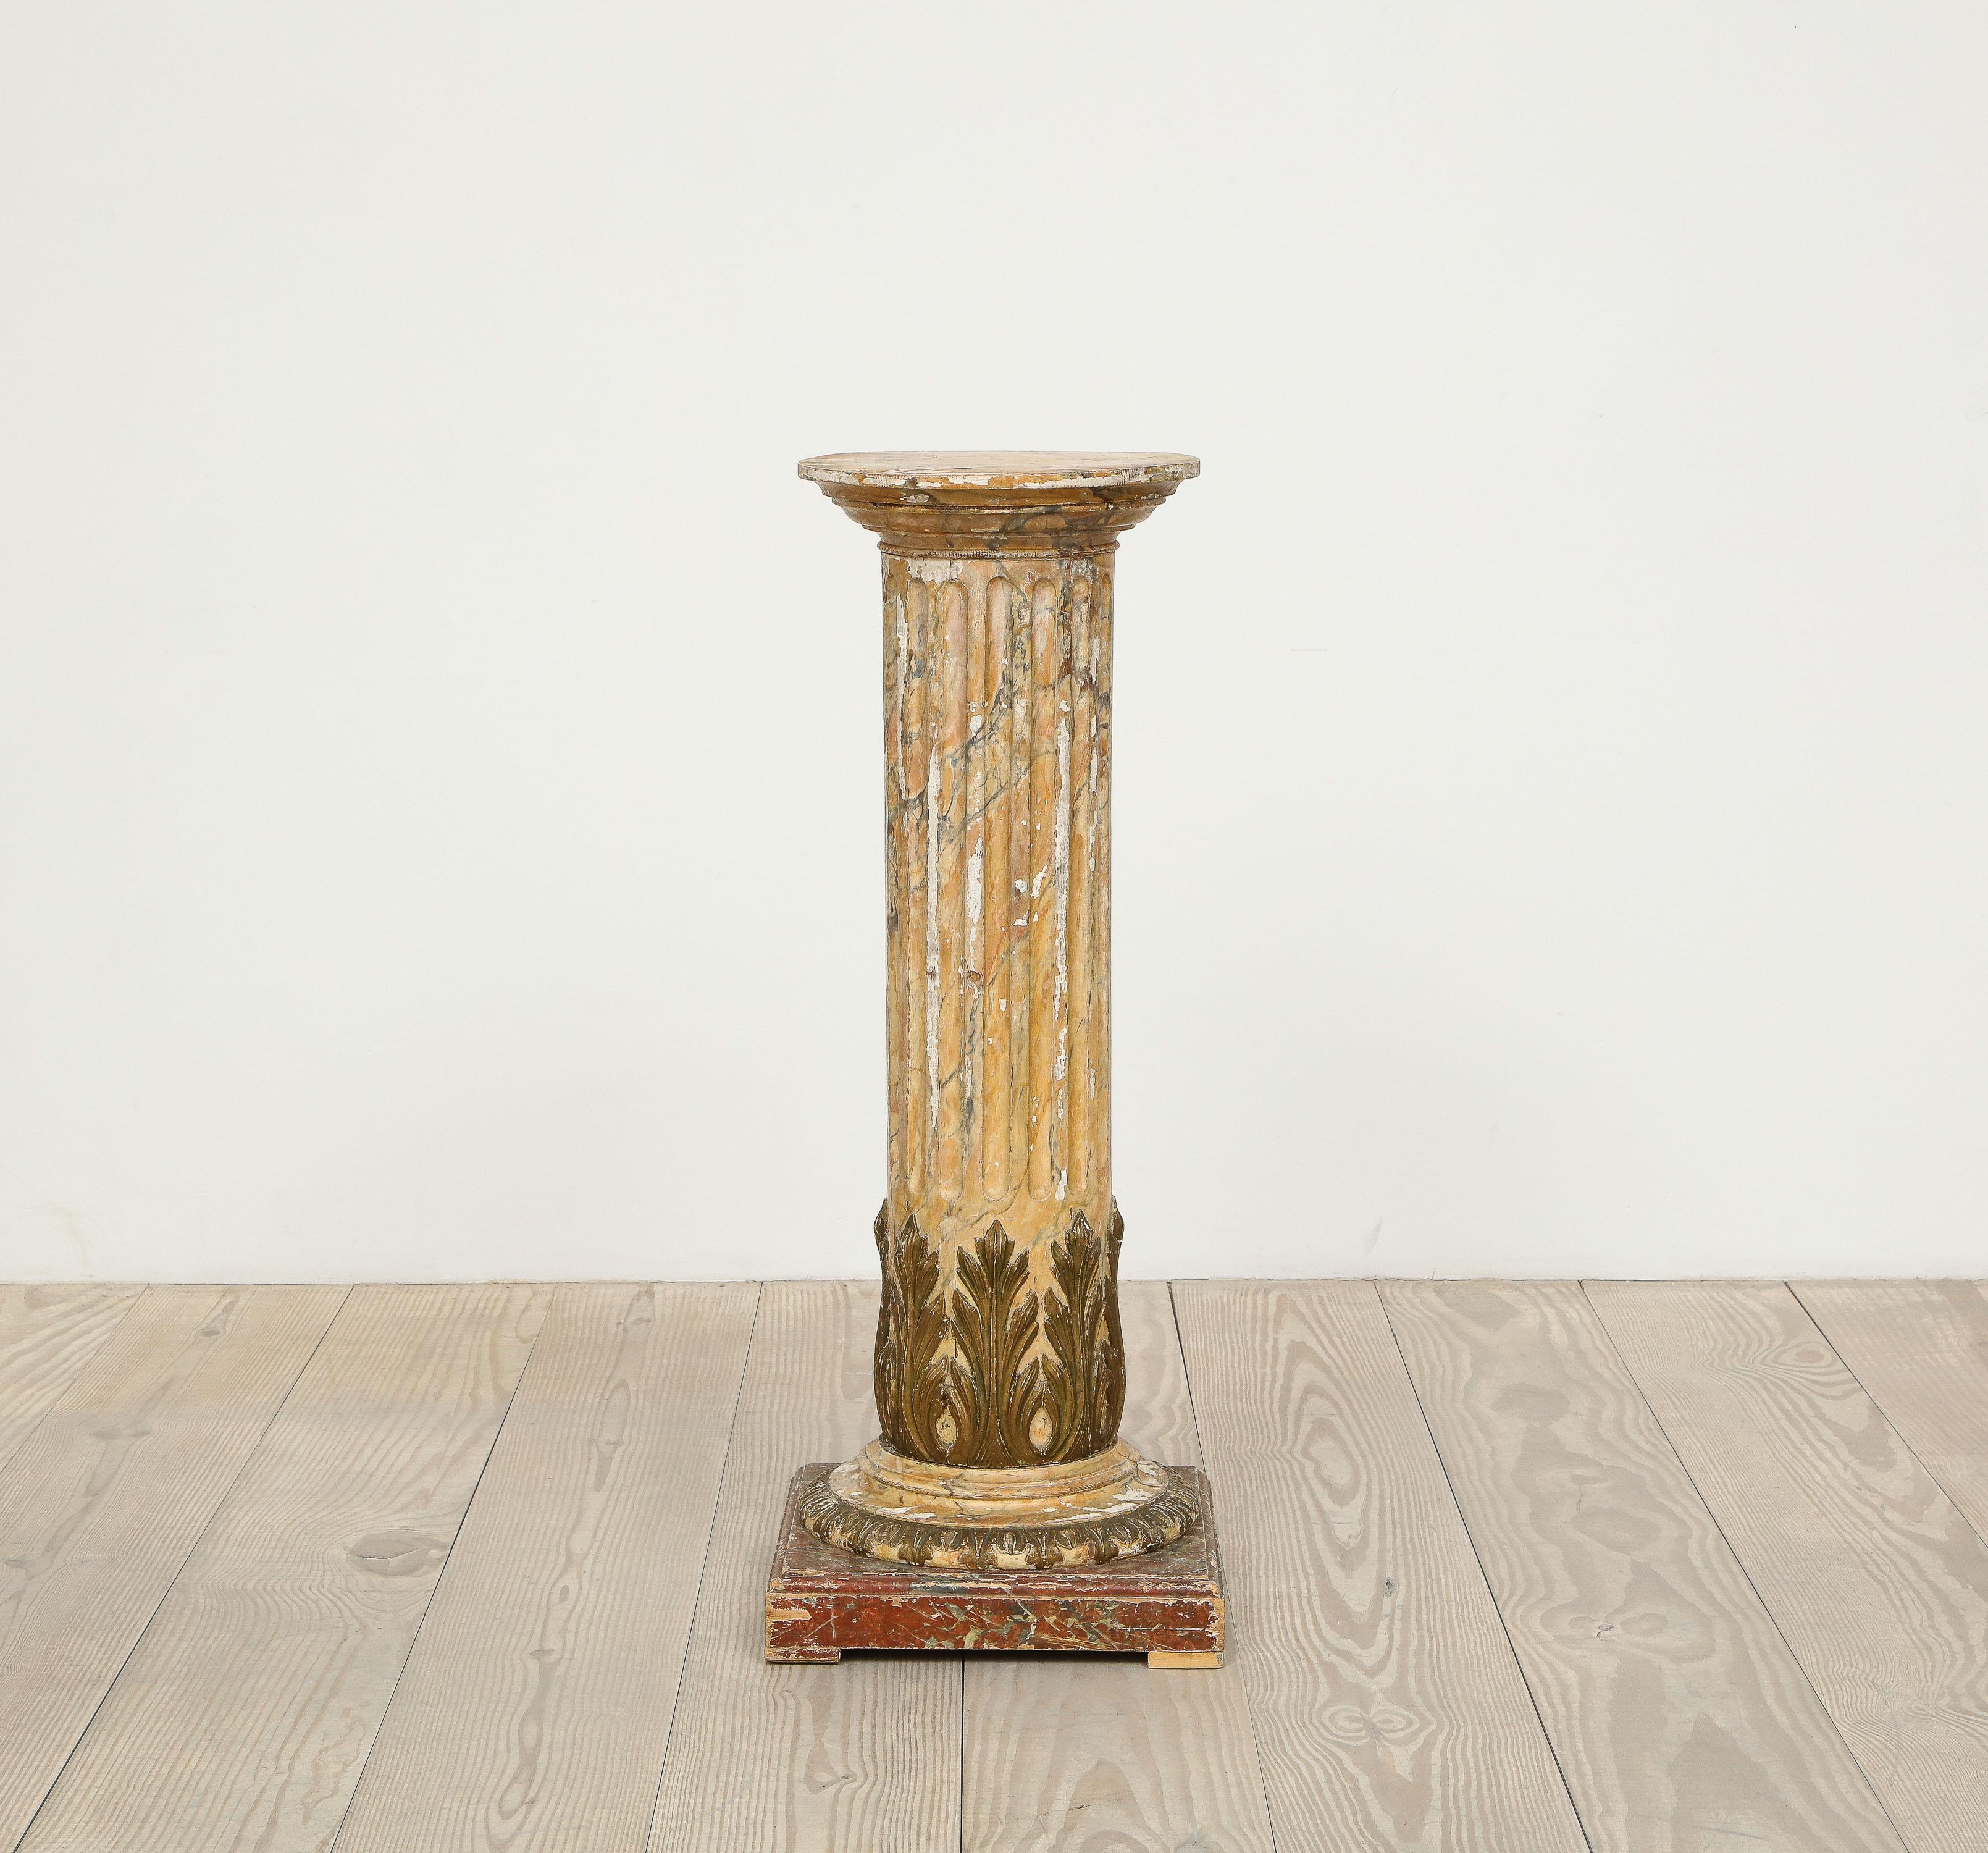 Gustavian, neoclassical 18th century pedestal, origin; Stockholm, Sweden, circa 1780 - 1795, with exceptionally painted, all original faux-marble finishes

Provenance: Private Collection, Stockholm, Sweden; thence by descent